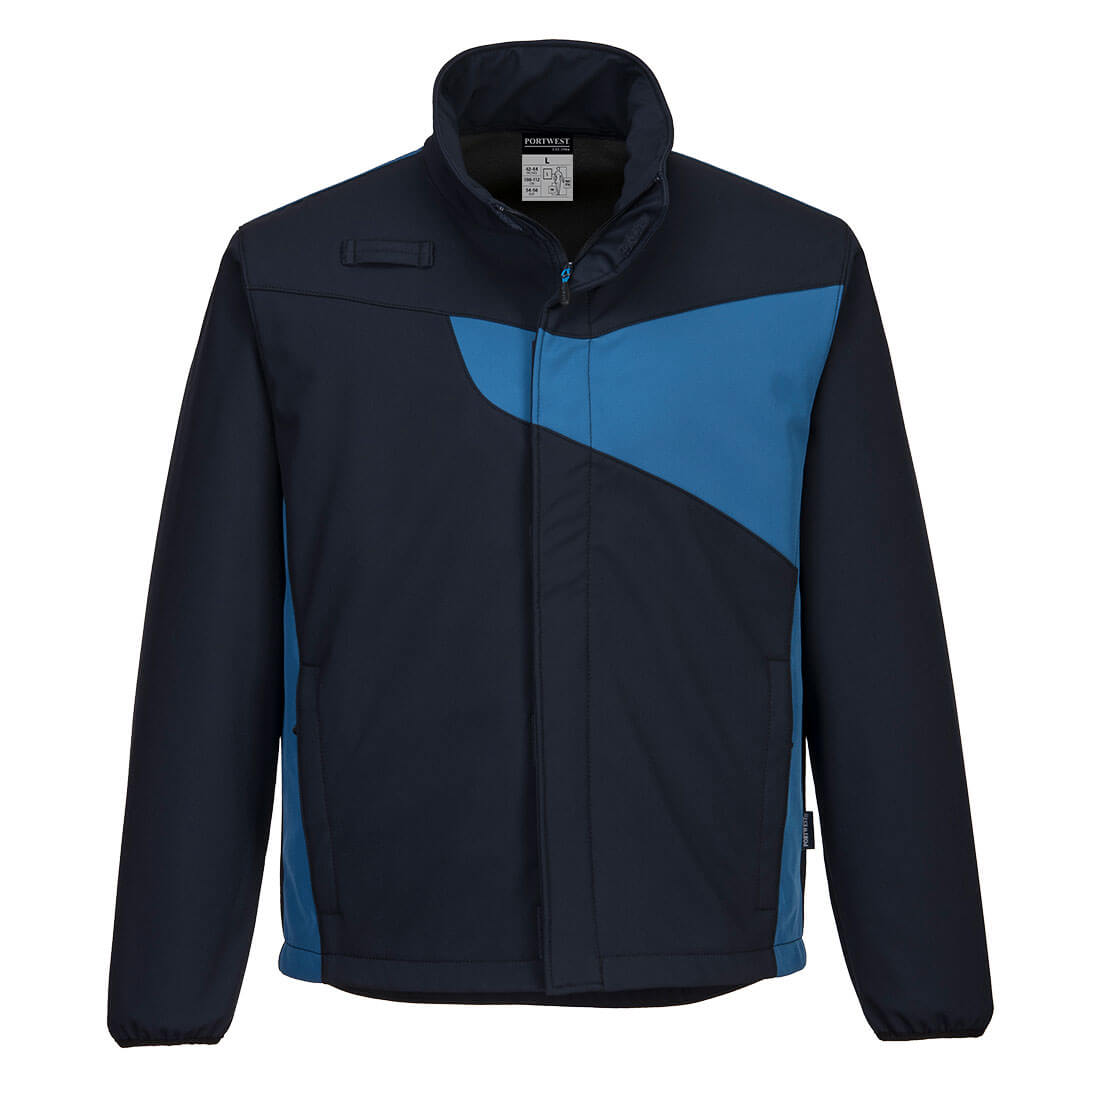 Veste Softshell PW2 (2 couches) - PW271